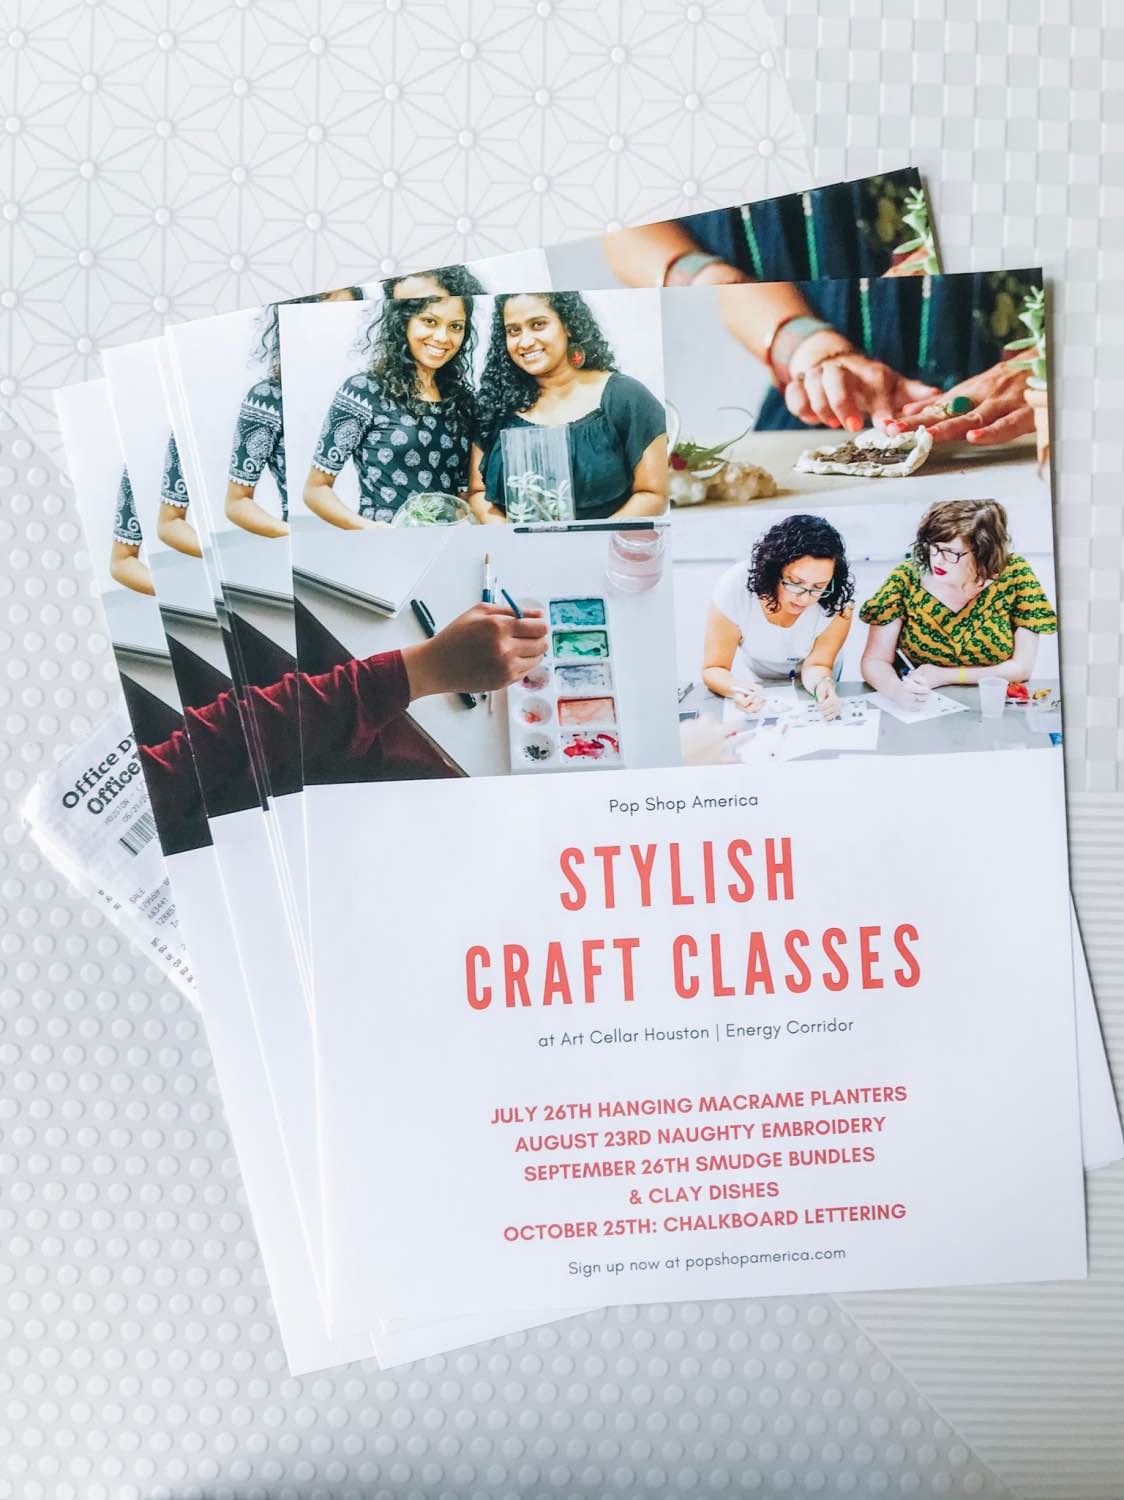 stylish craft classes posters small business marketing materials